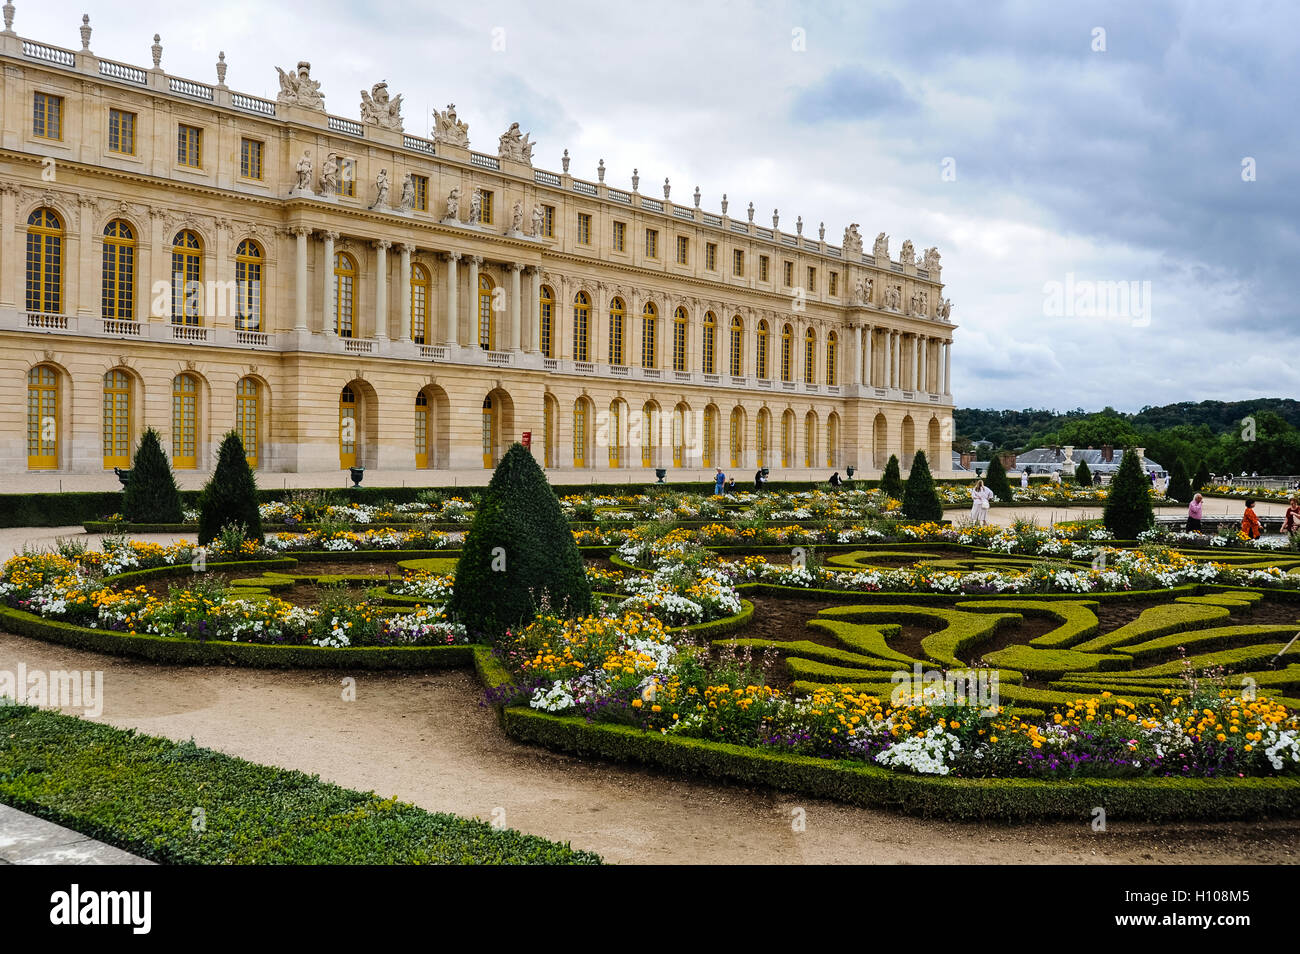 The Palace of Versailles, or simply Versailles, is a royal château close to Paris, France. Stock Photo